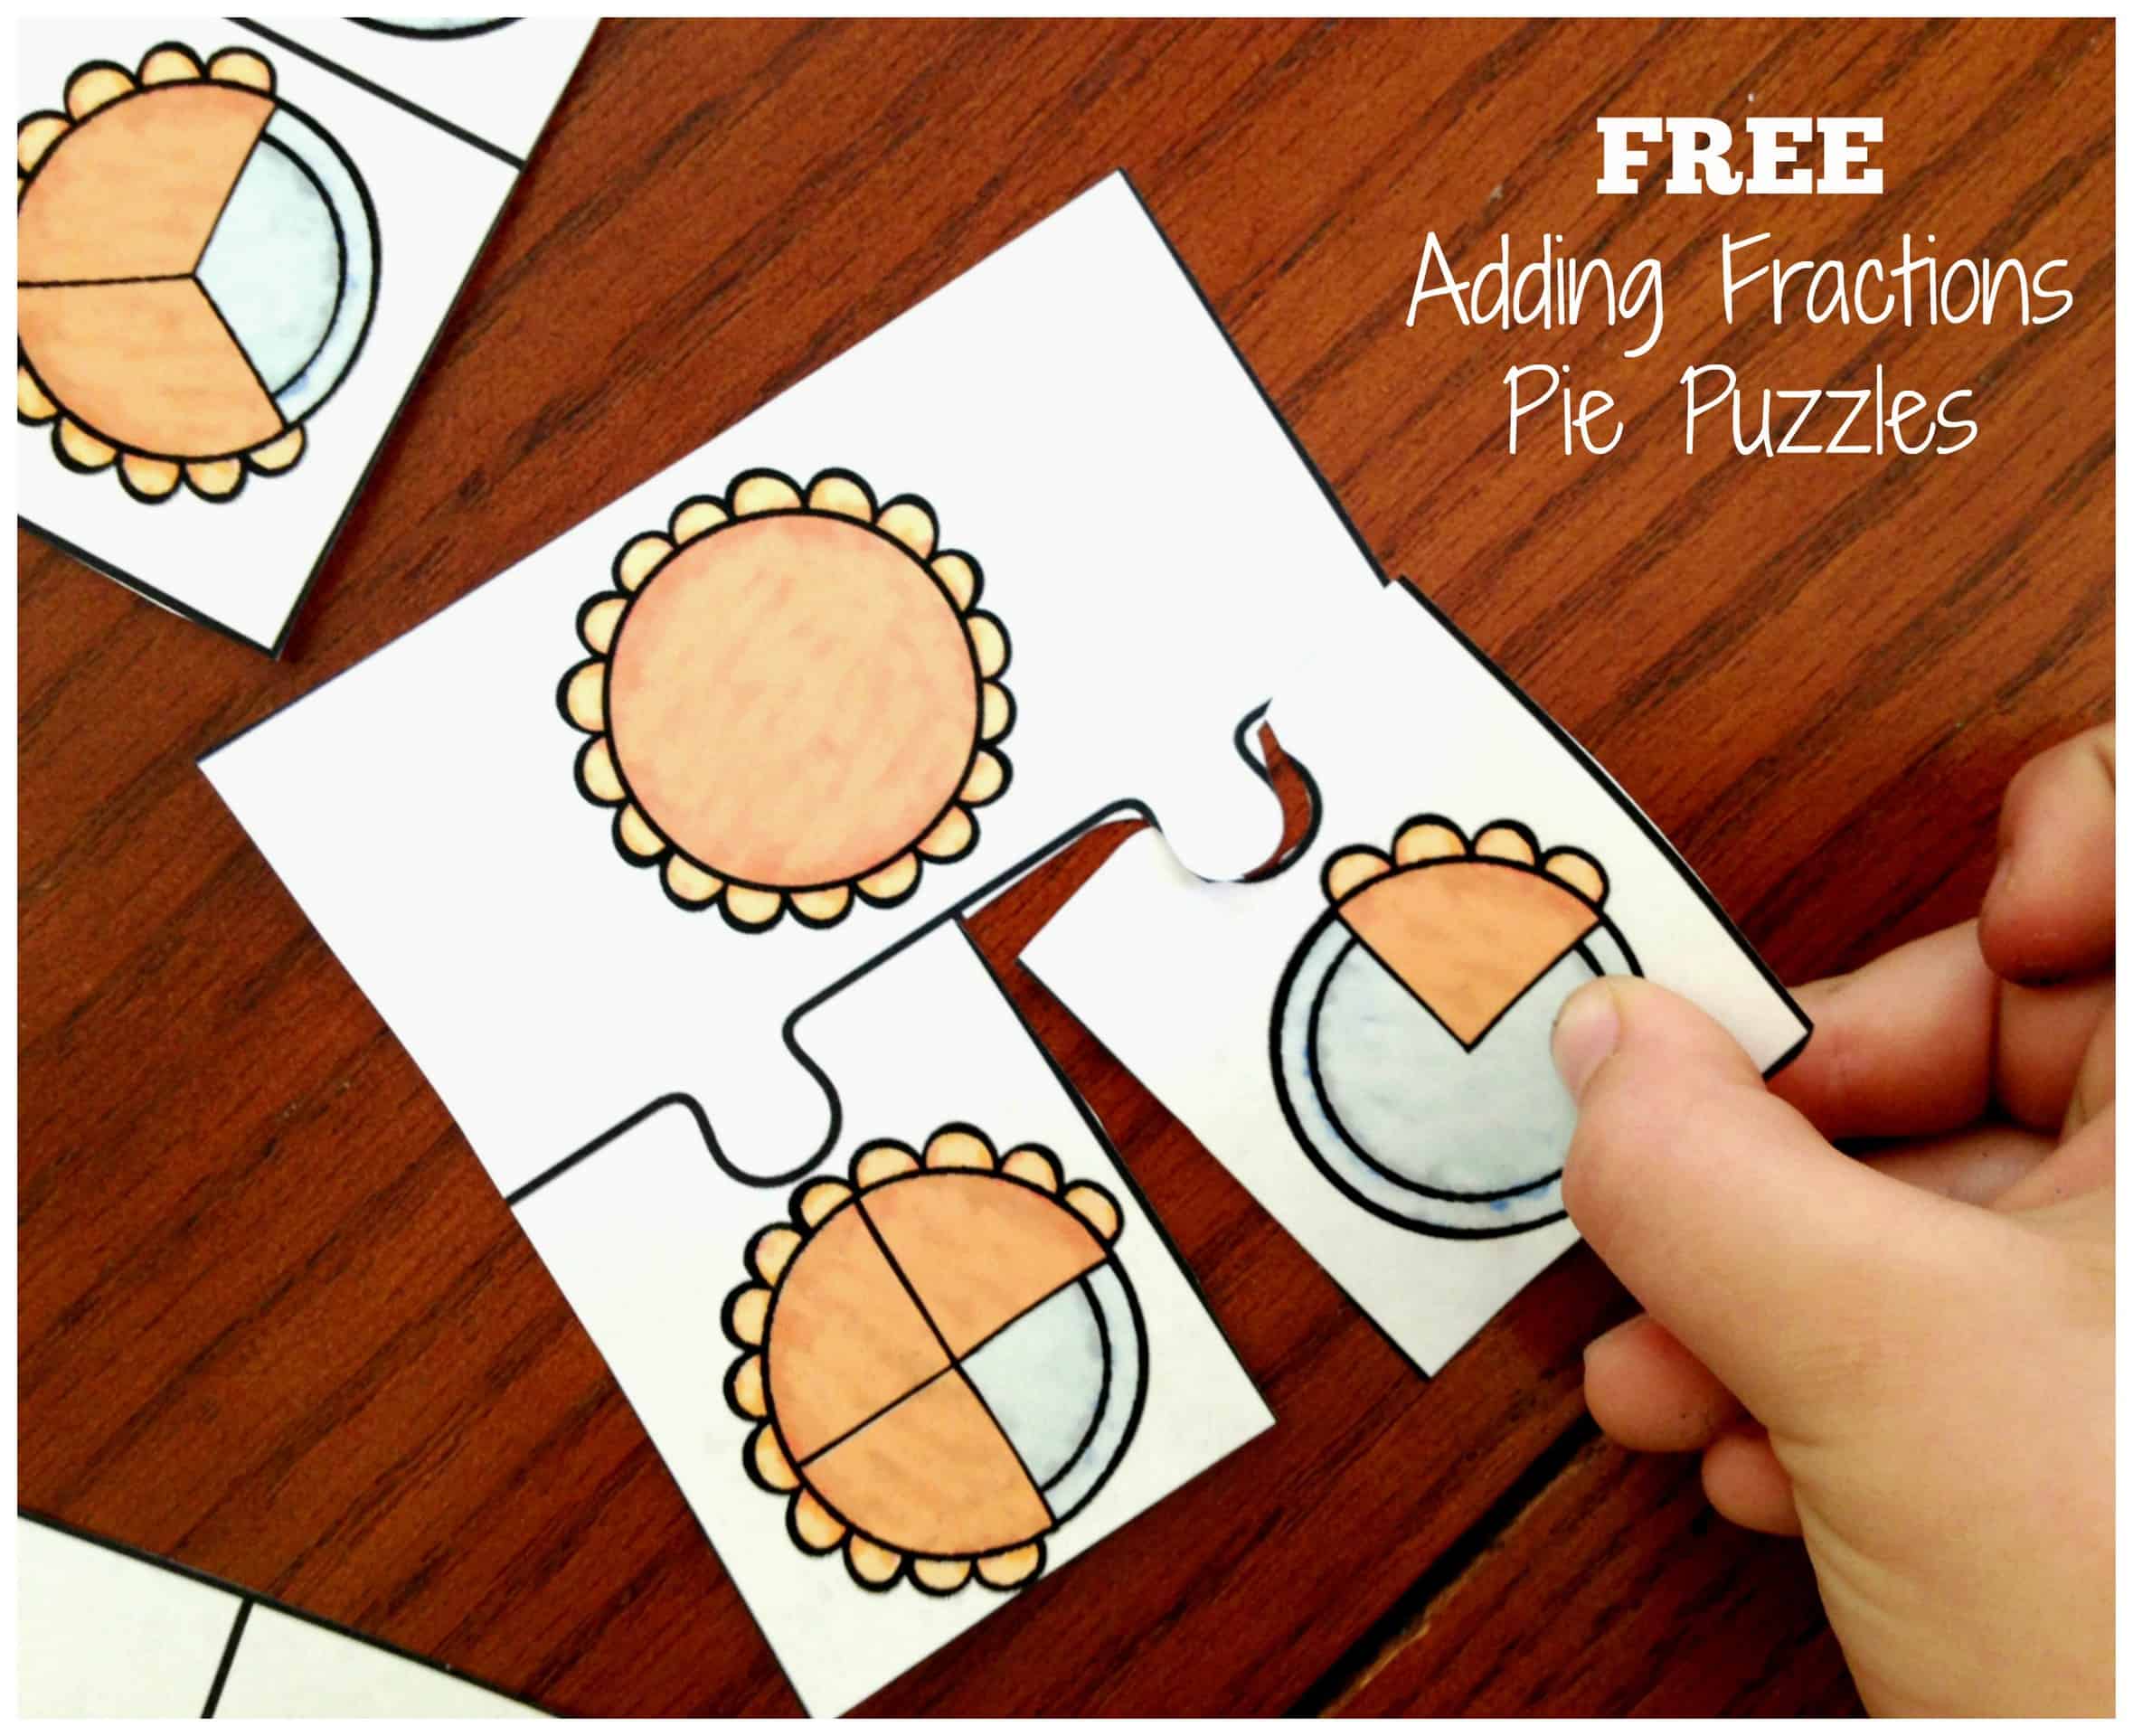 Fun Adding Fractions Game | Fraction Pie Puzzles | Free Printable